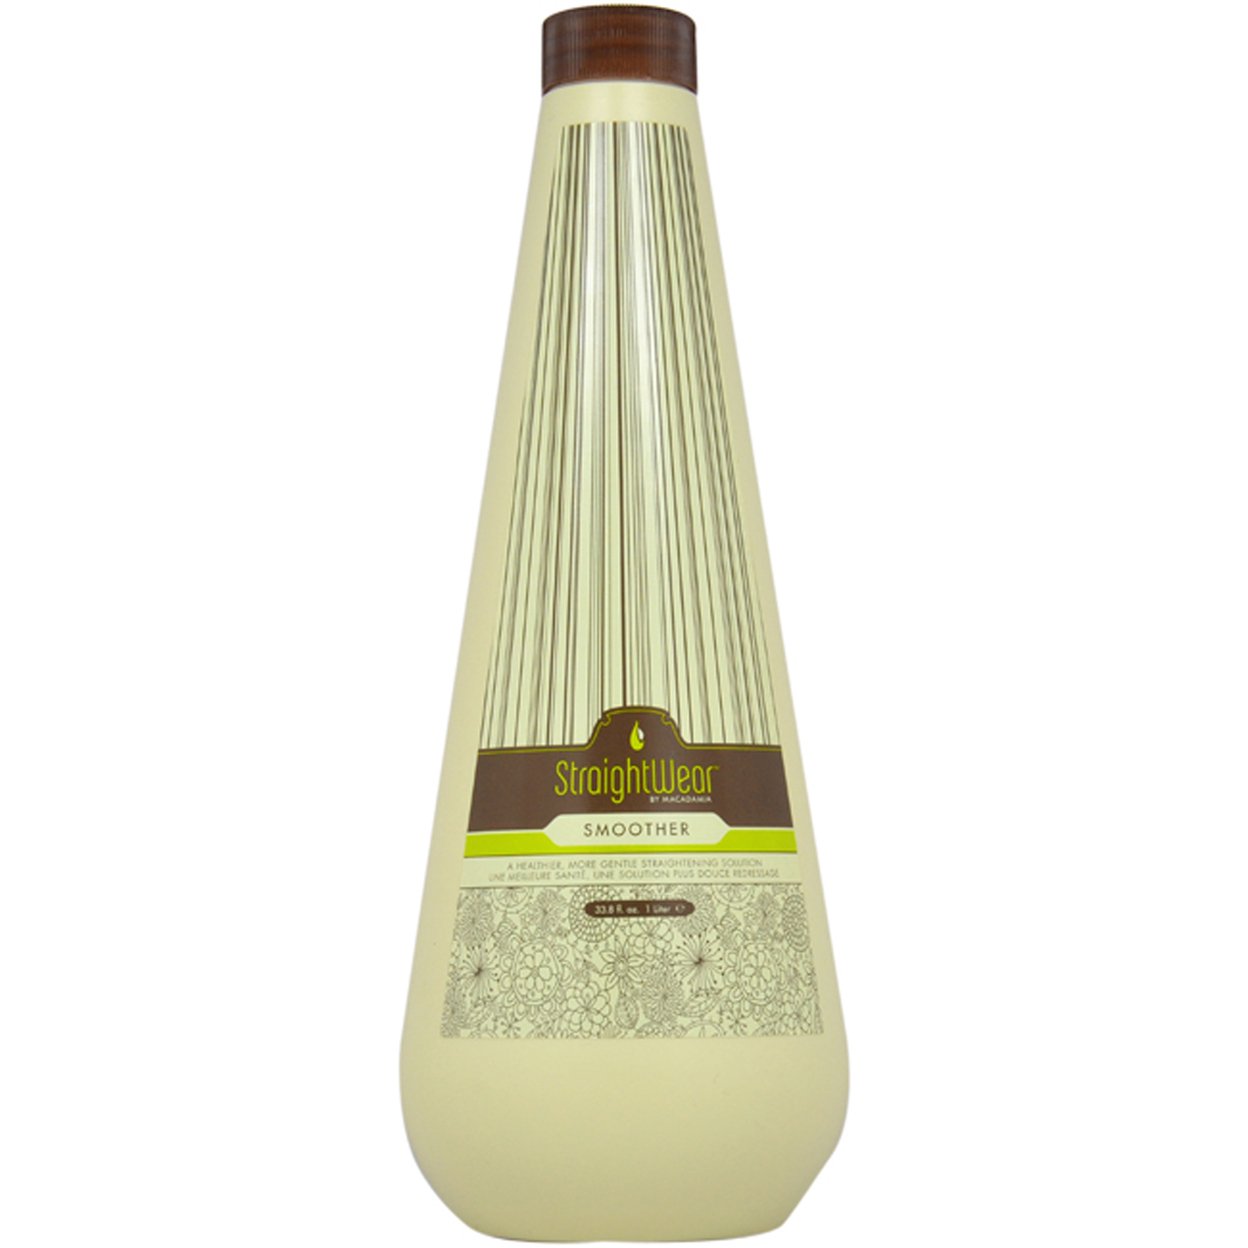 Macadamia Oil Natural Oil Straightwear Smoother Straightening Solution Smoother 33.8 Oz